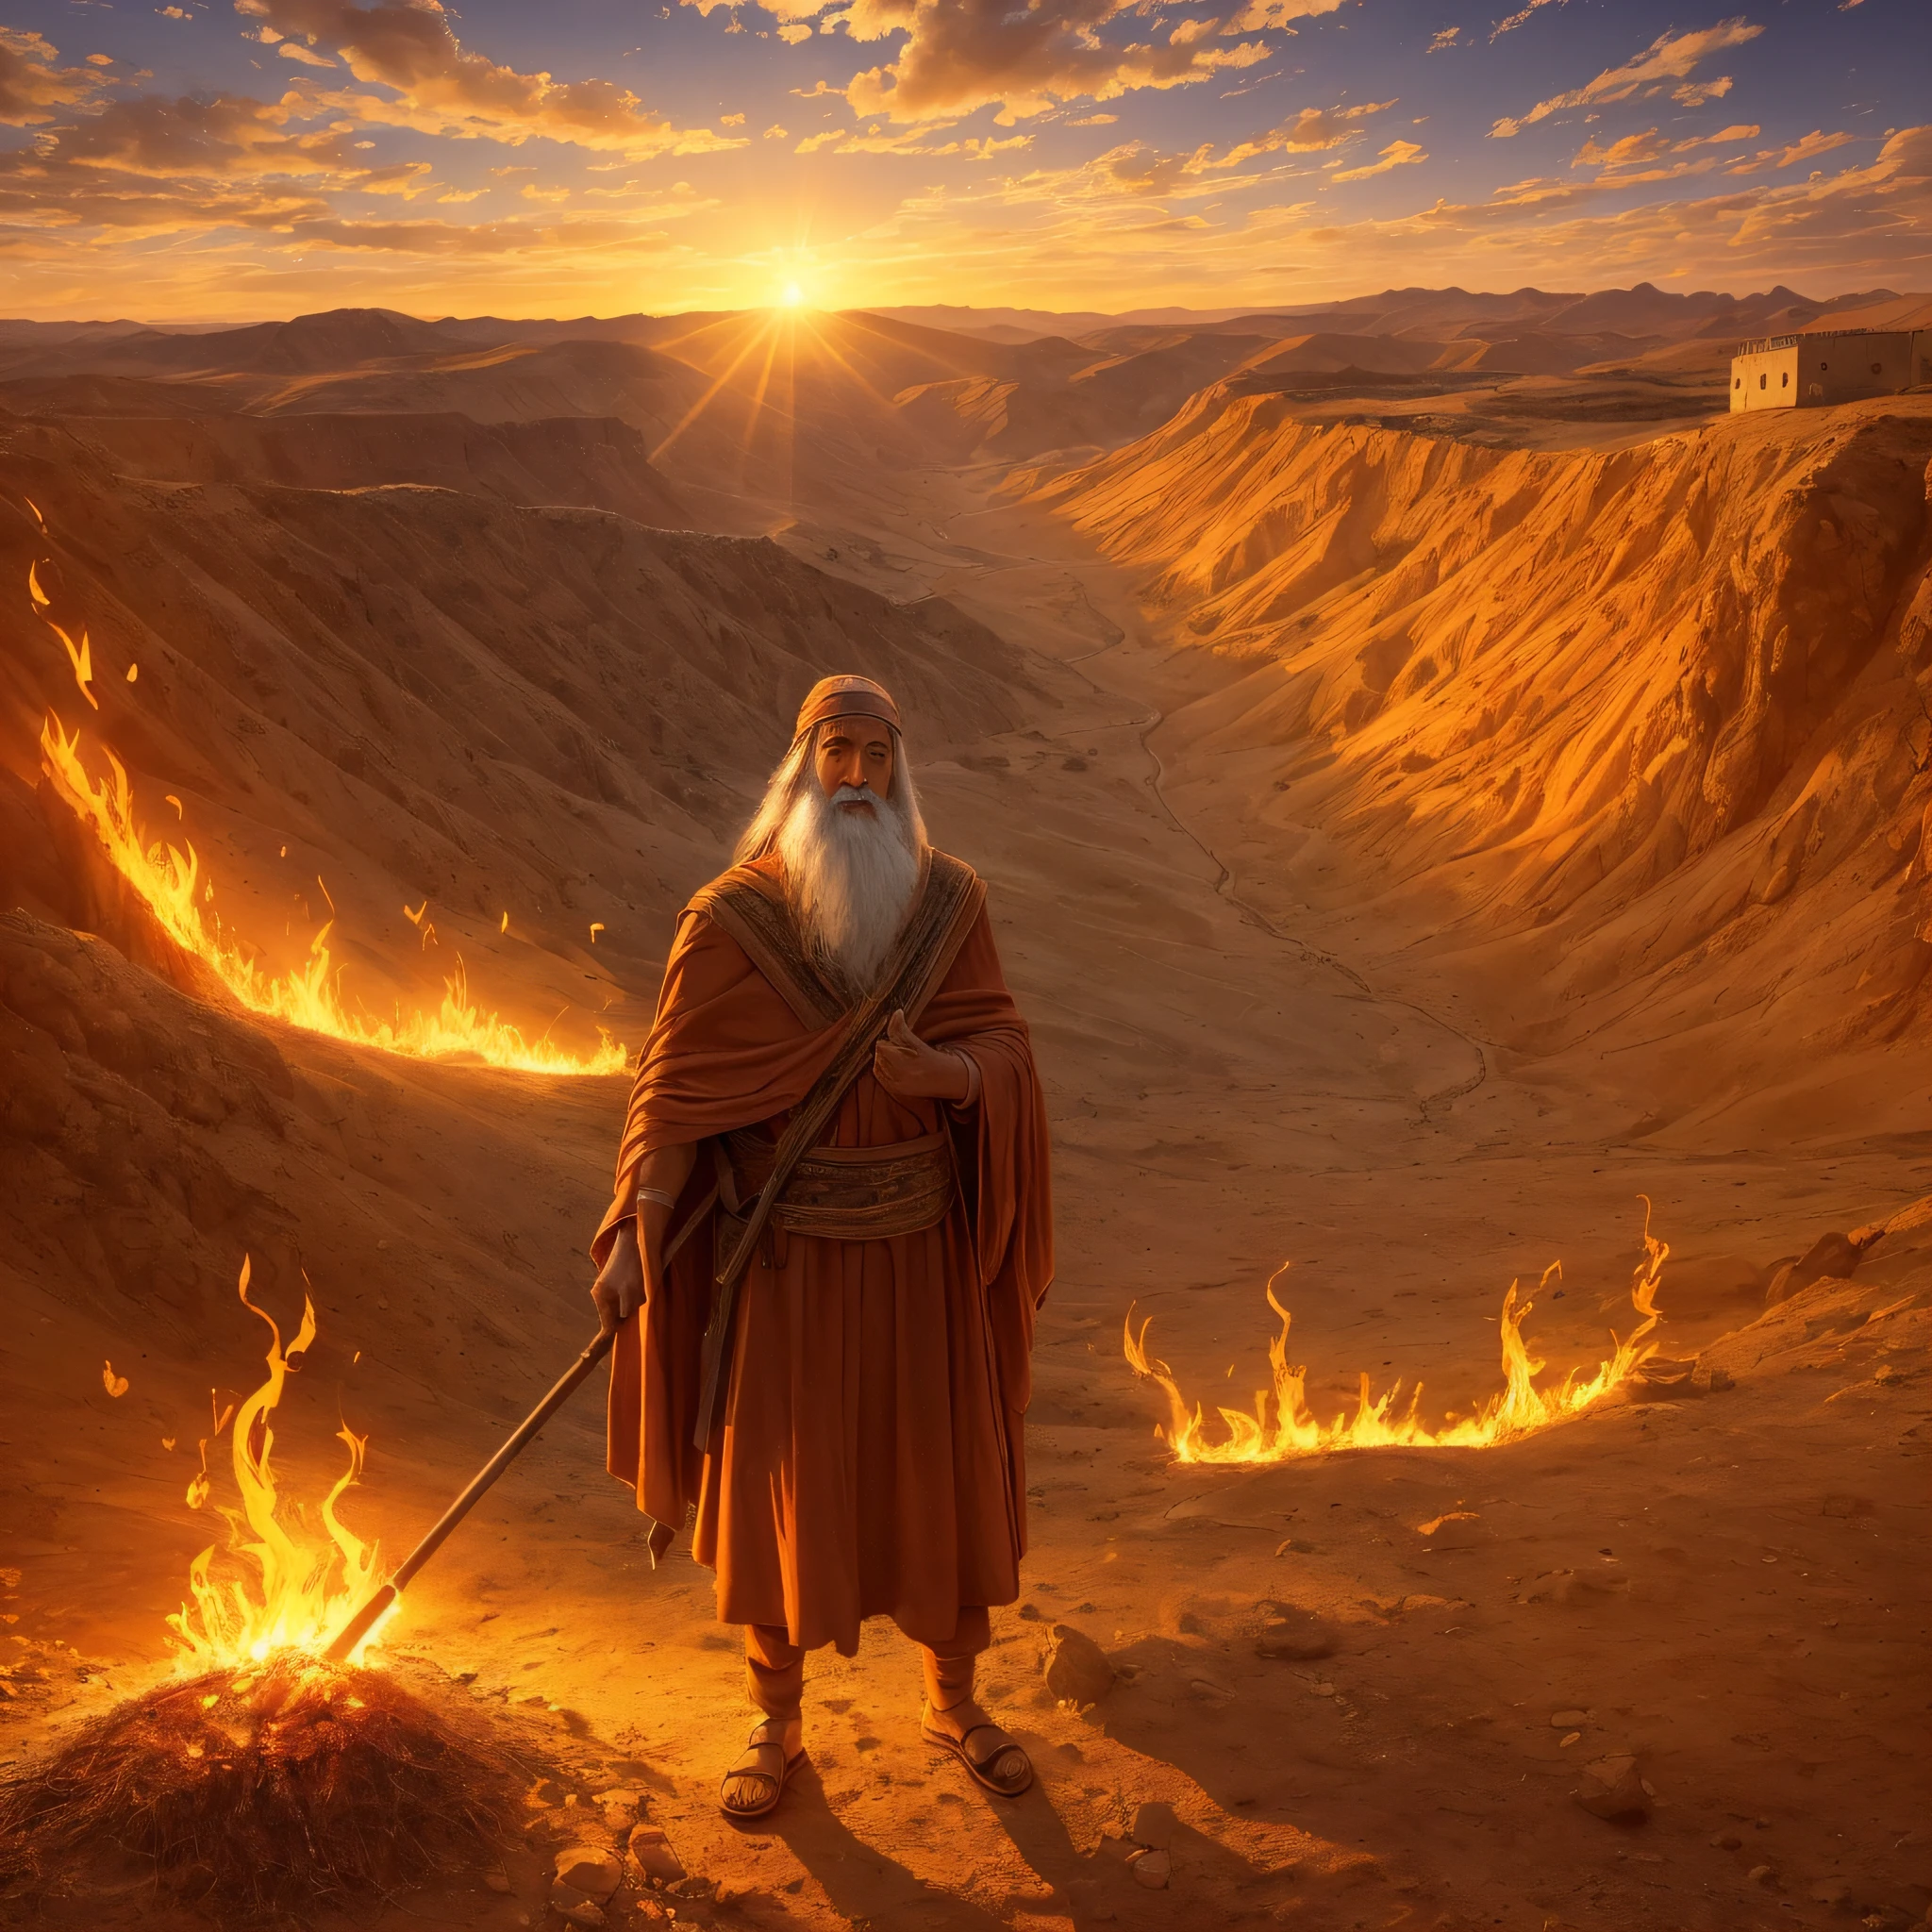 Moses before the burning full bush on Mount Horeb. Moses is an old man dressed as a shepherd. The bush is on bright, vibrant flames, but it is not consumed by fire. Moses looks with amazement and admiration at the bush. The surrounding environment is mountainous and desert, with the sun setting and illuminating the scene with an orange light. This image represents the moment when Moses is called by God to deliver the people of Israel. --auto --s2